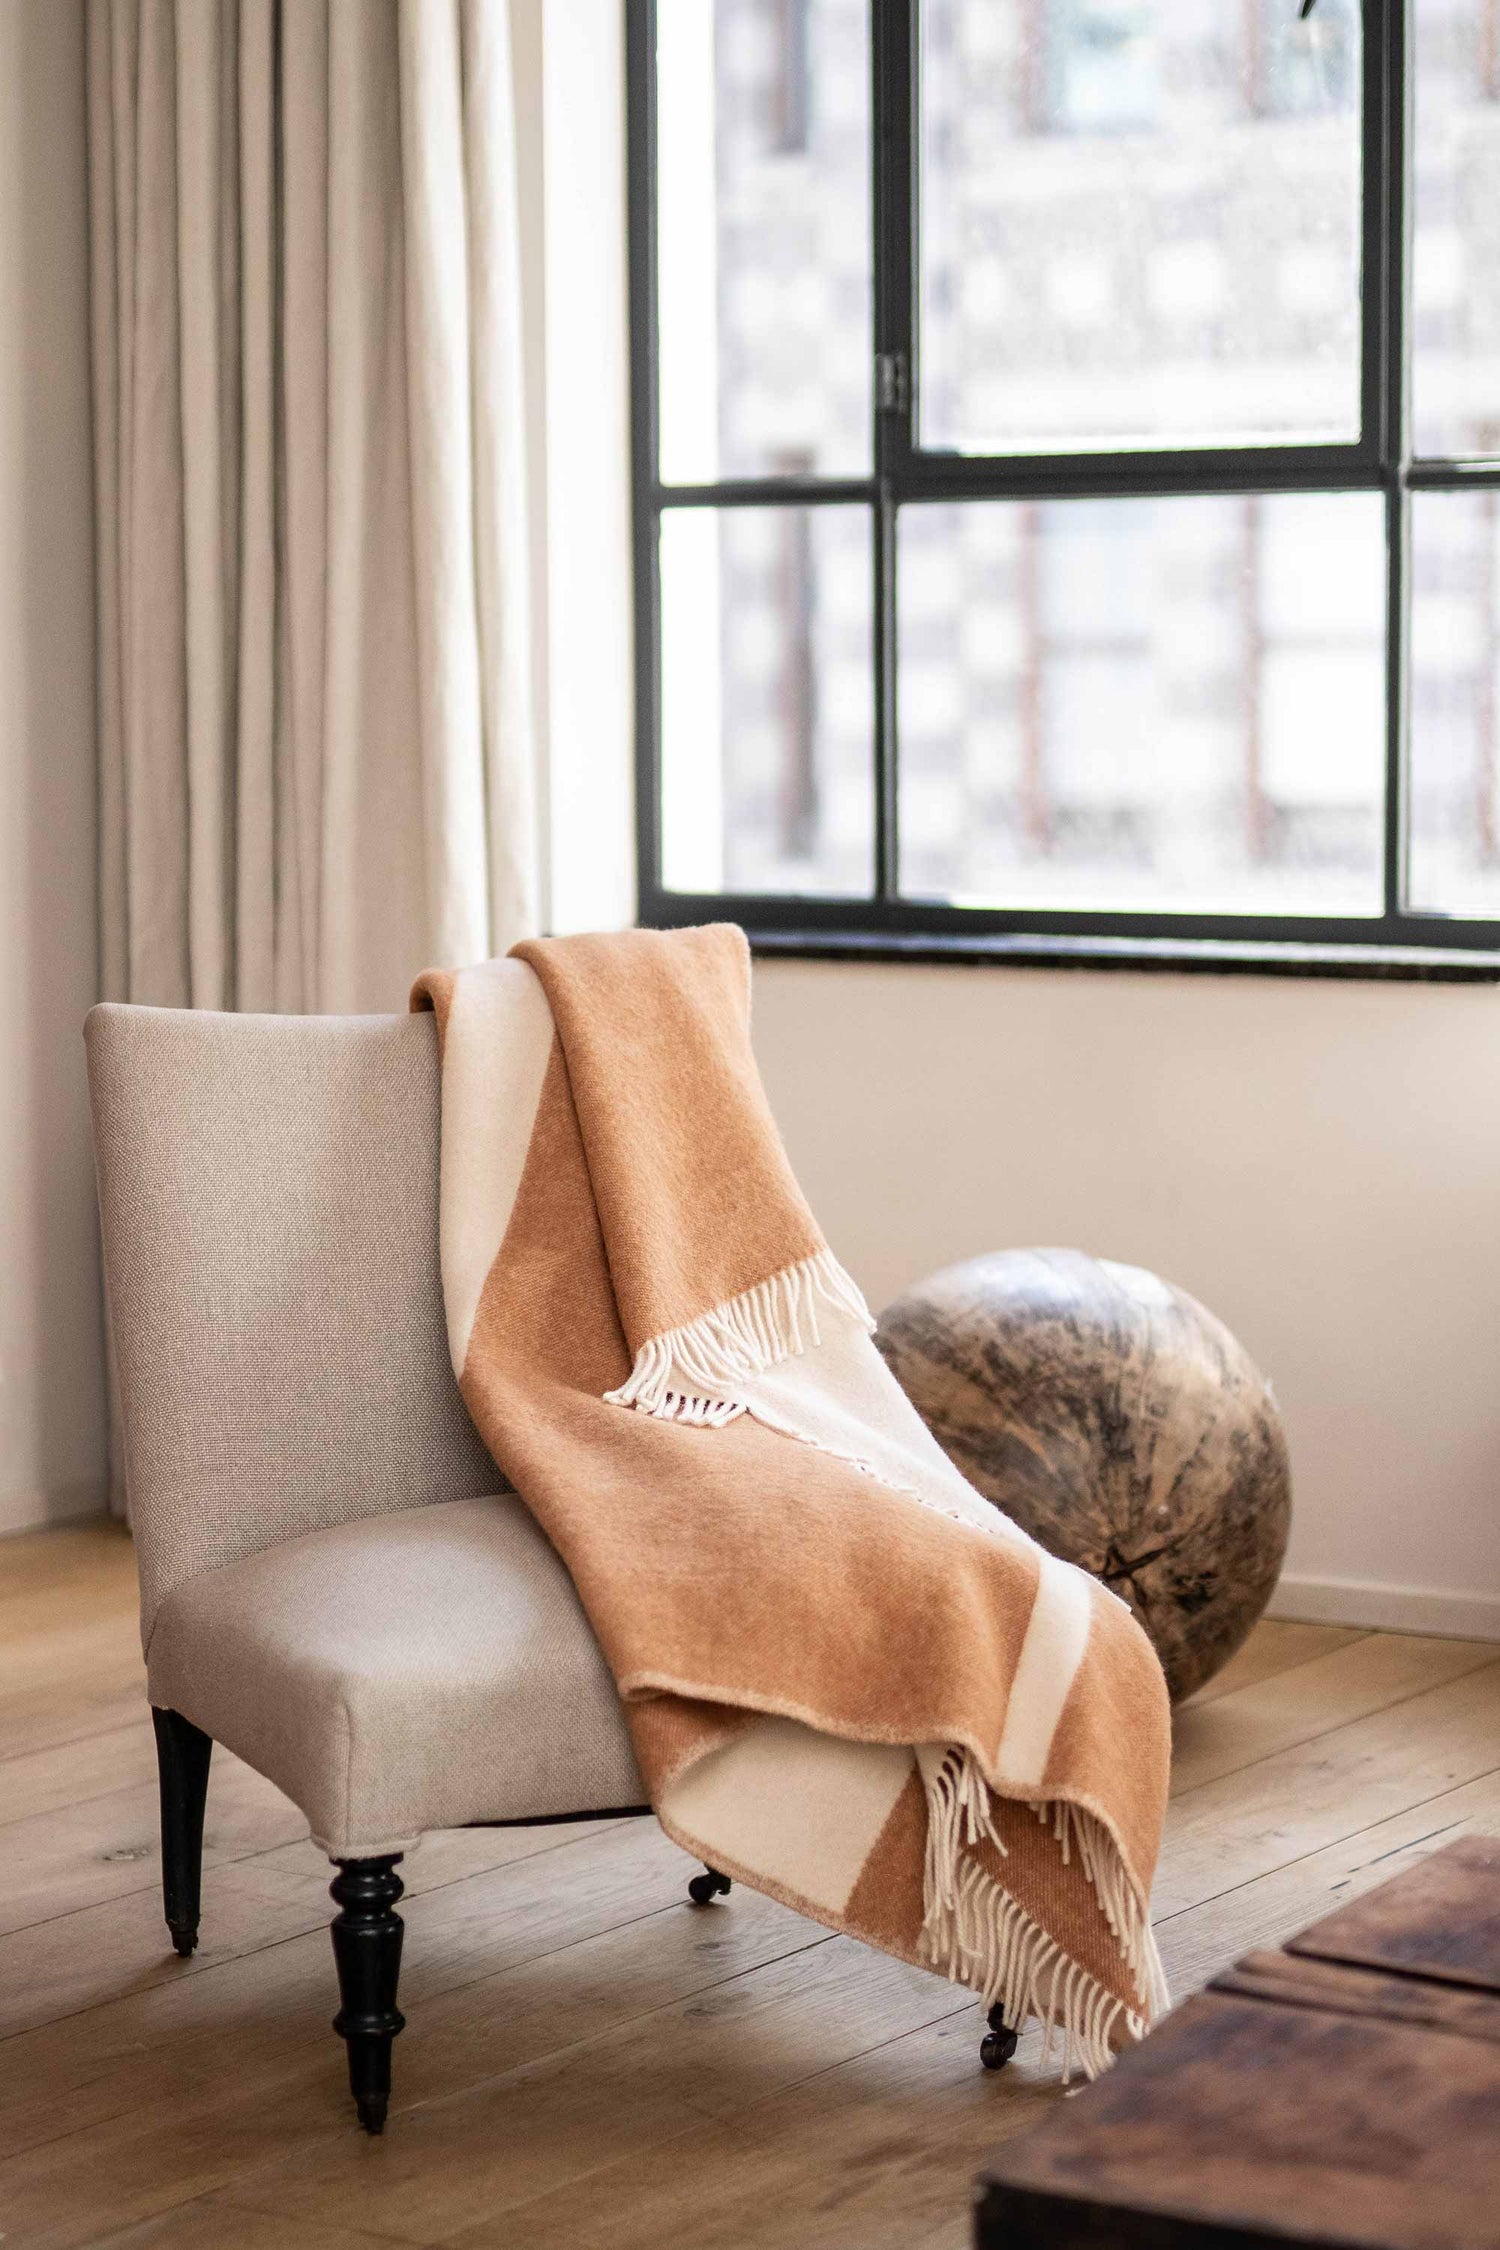 The River Grain Wool Blanket by Forestry Wool is made from 100% pure wool from New Zealand. 